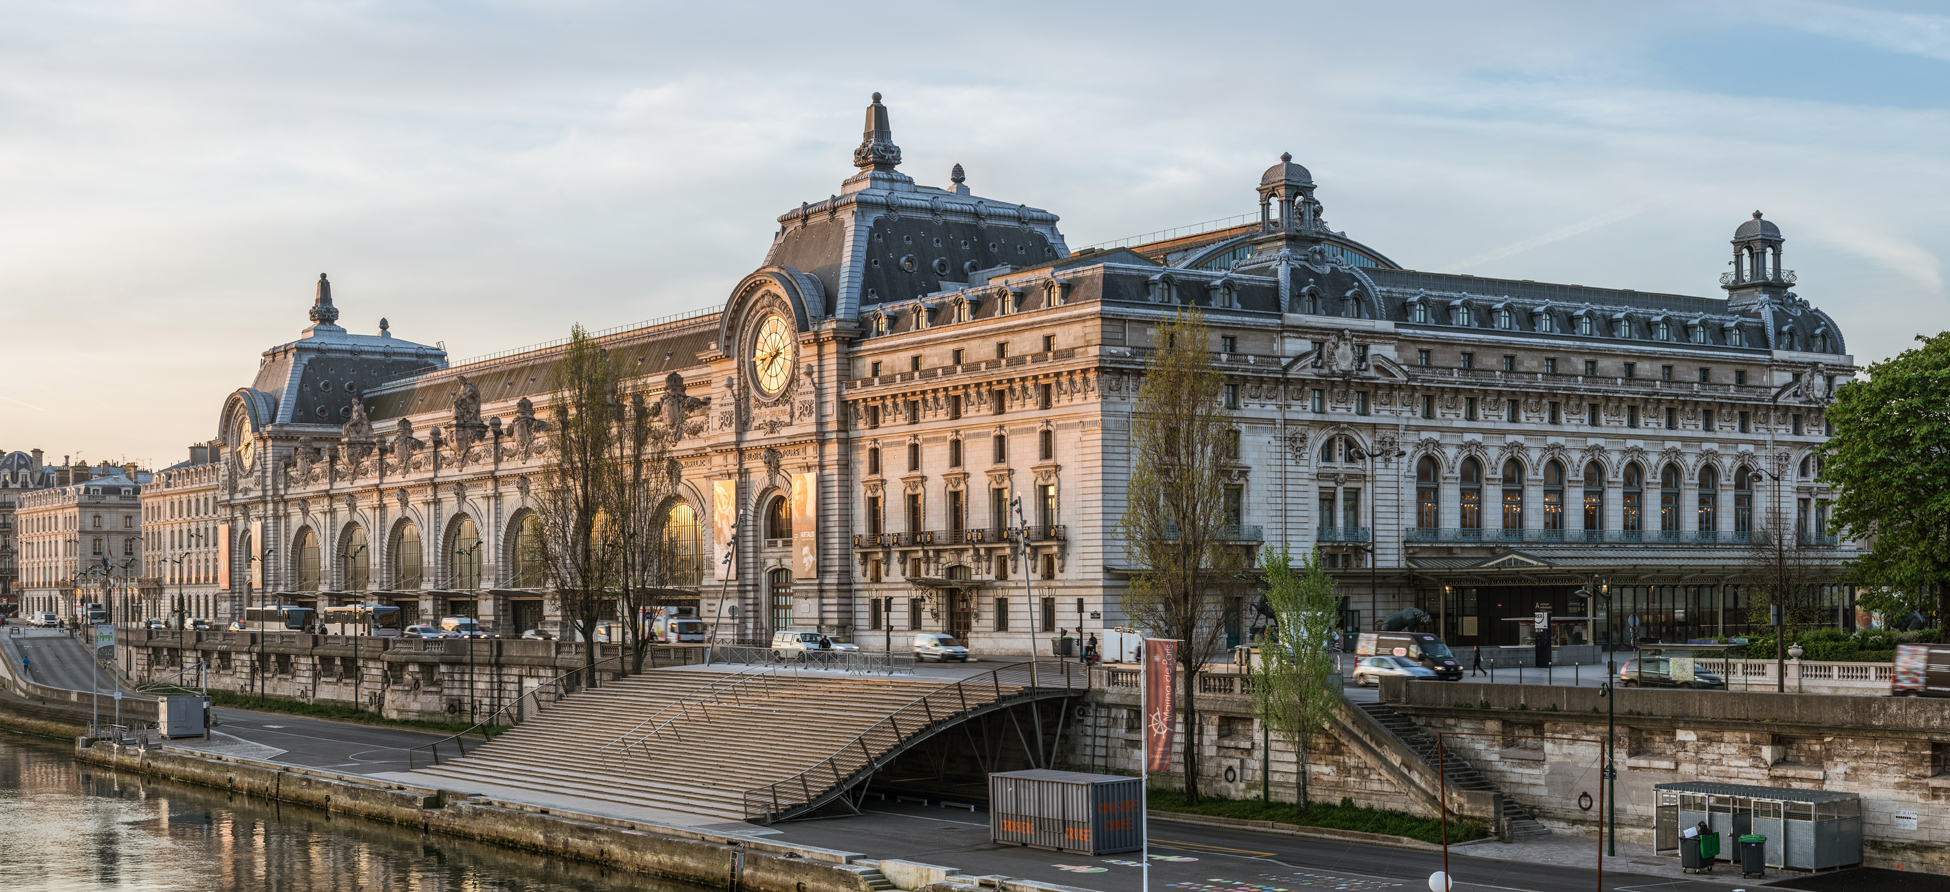 A trip to Paris’s Musee d’Orsay is one of the many activities that encourages writers to find motivation in masterworks of creativity during the June Left Bank Writers Retreat.